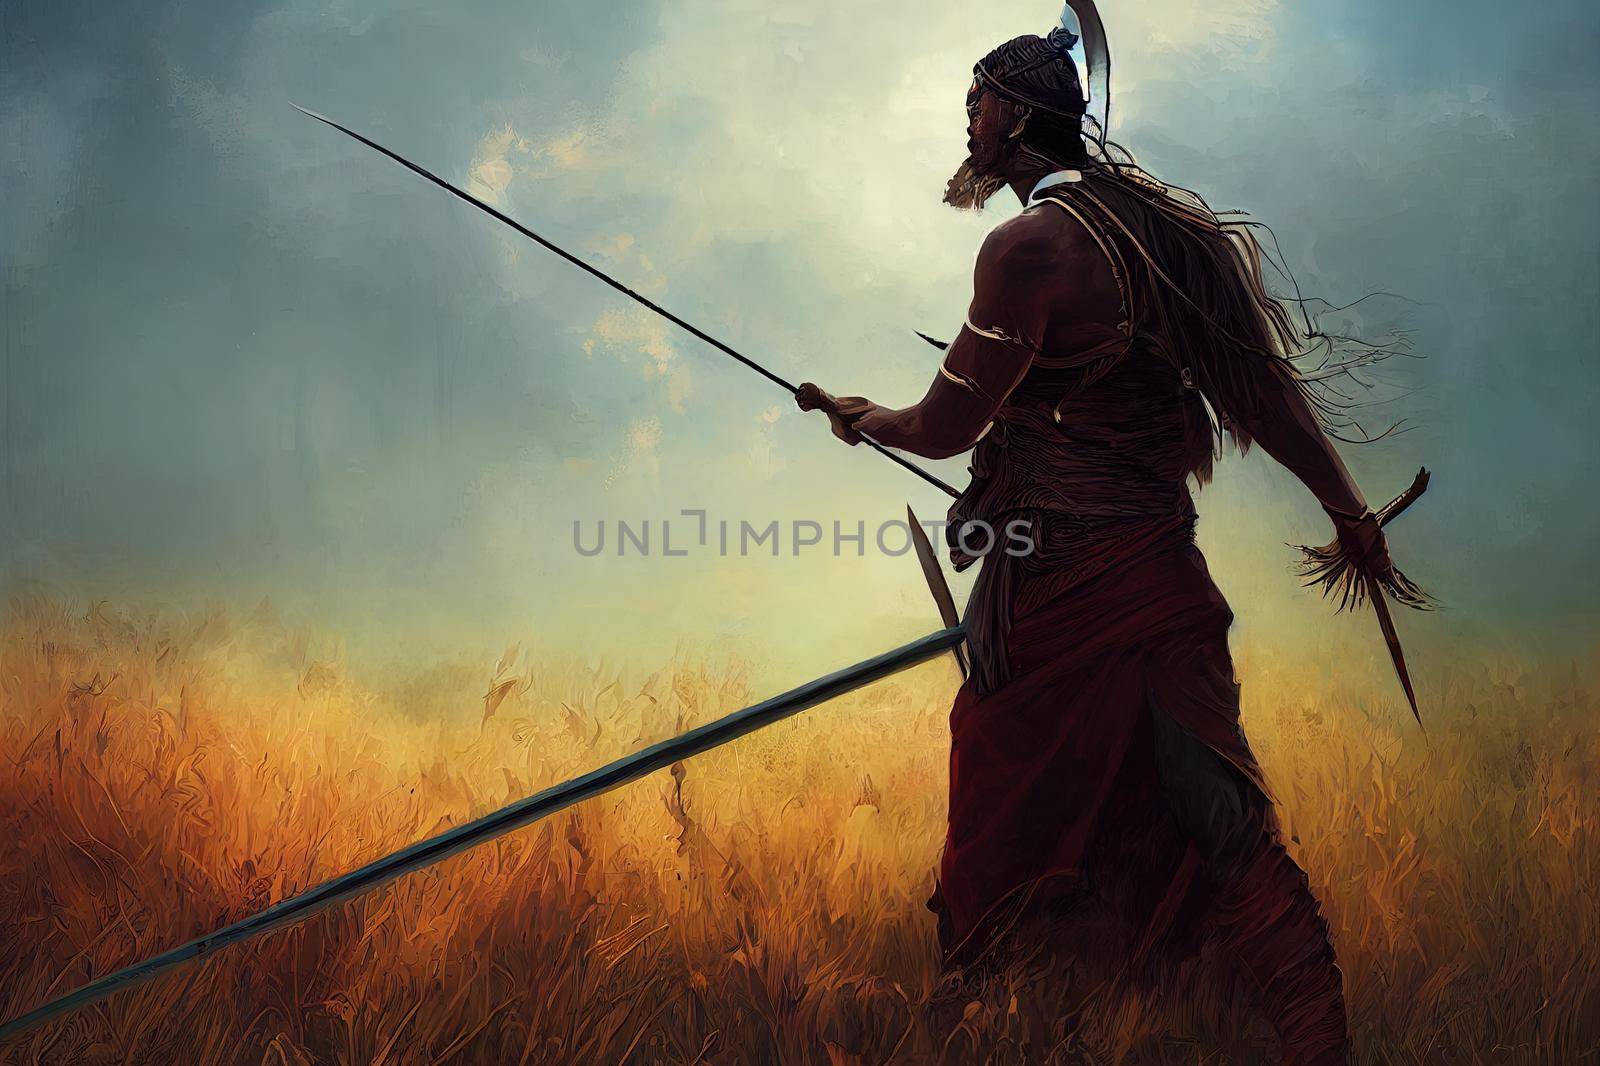 ancient warrior with the magic spear standing in the field, digital art style, illustration painting